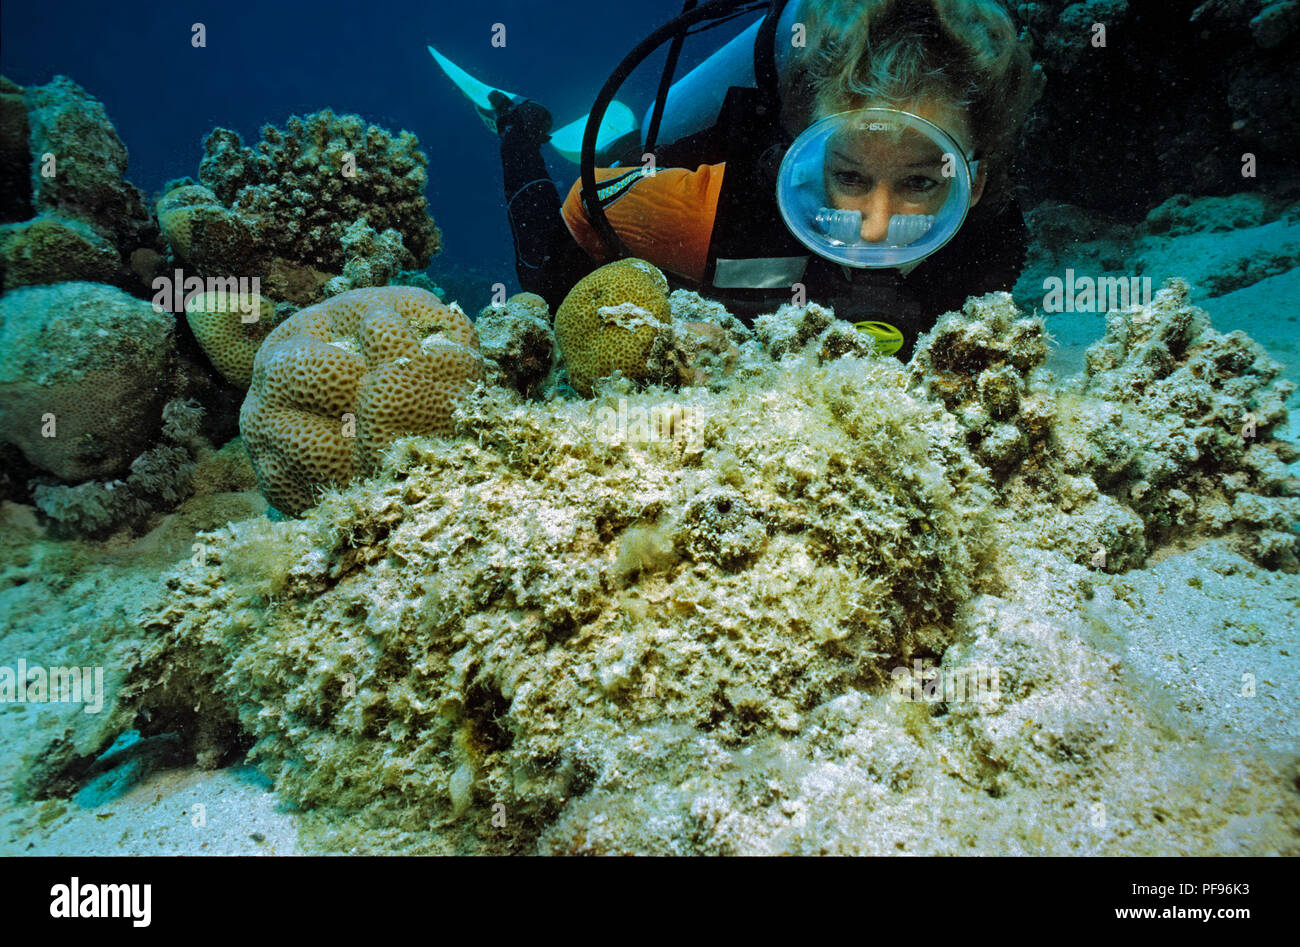 Scuba diver discovers a Reef stonefish or real stonefish (Synanceia verrucosa), the world's most venomous fish, dug in sand, El Quesier, Egypt Stock Photo